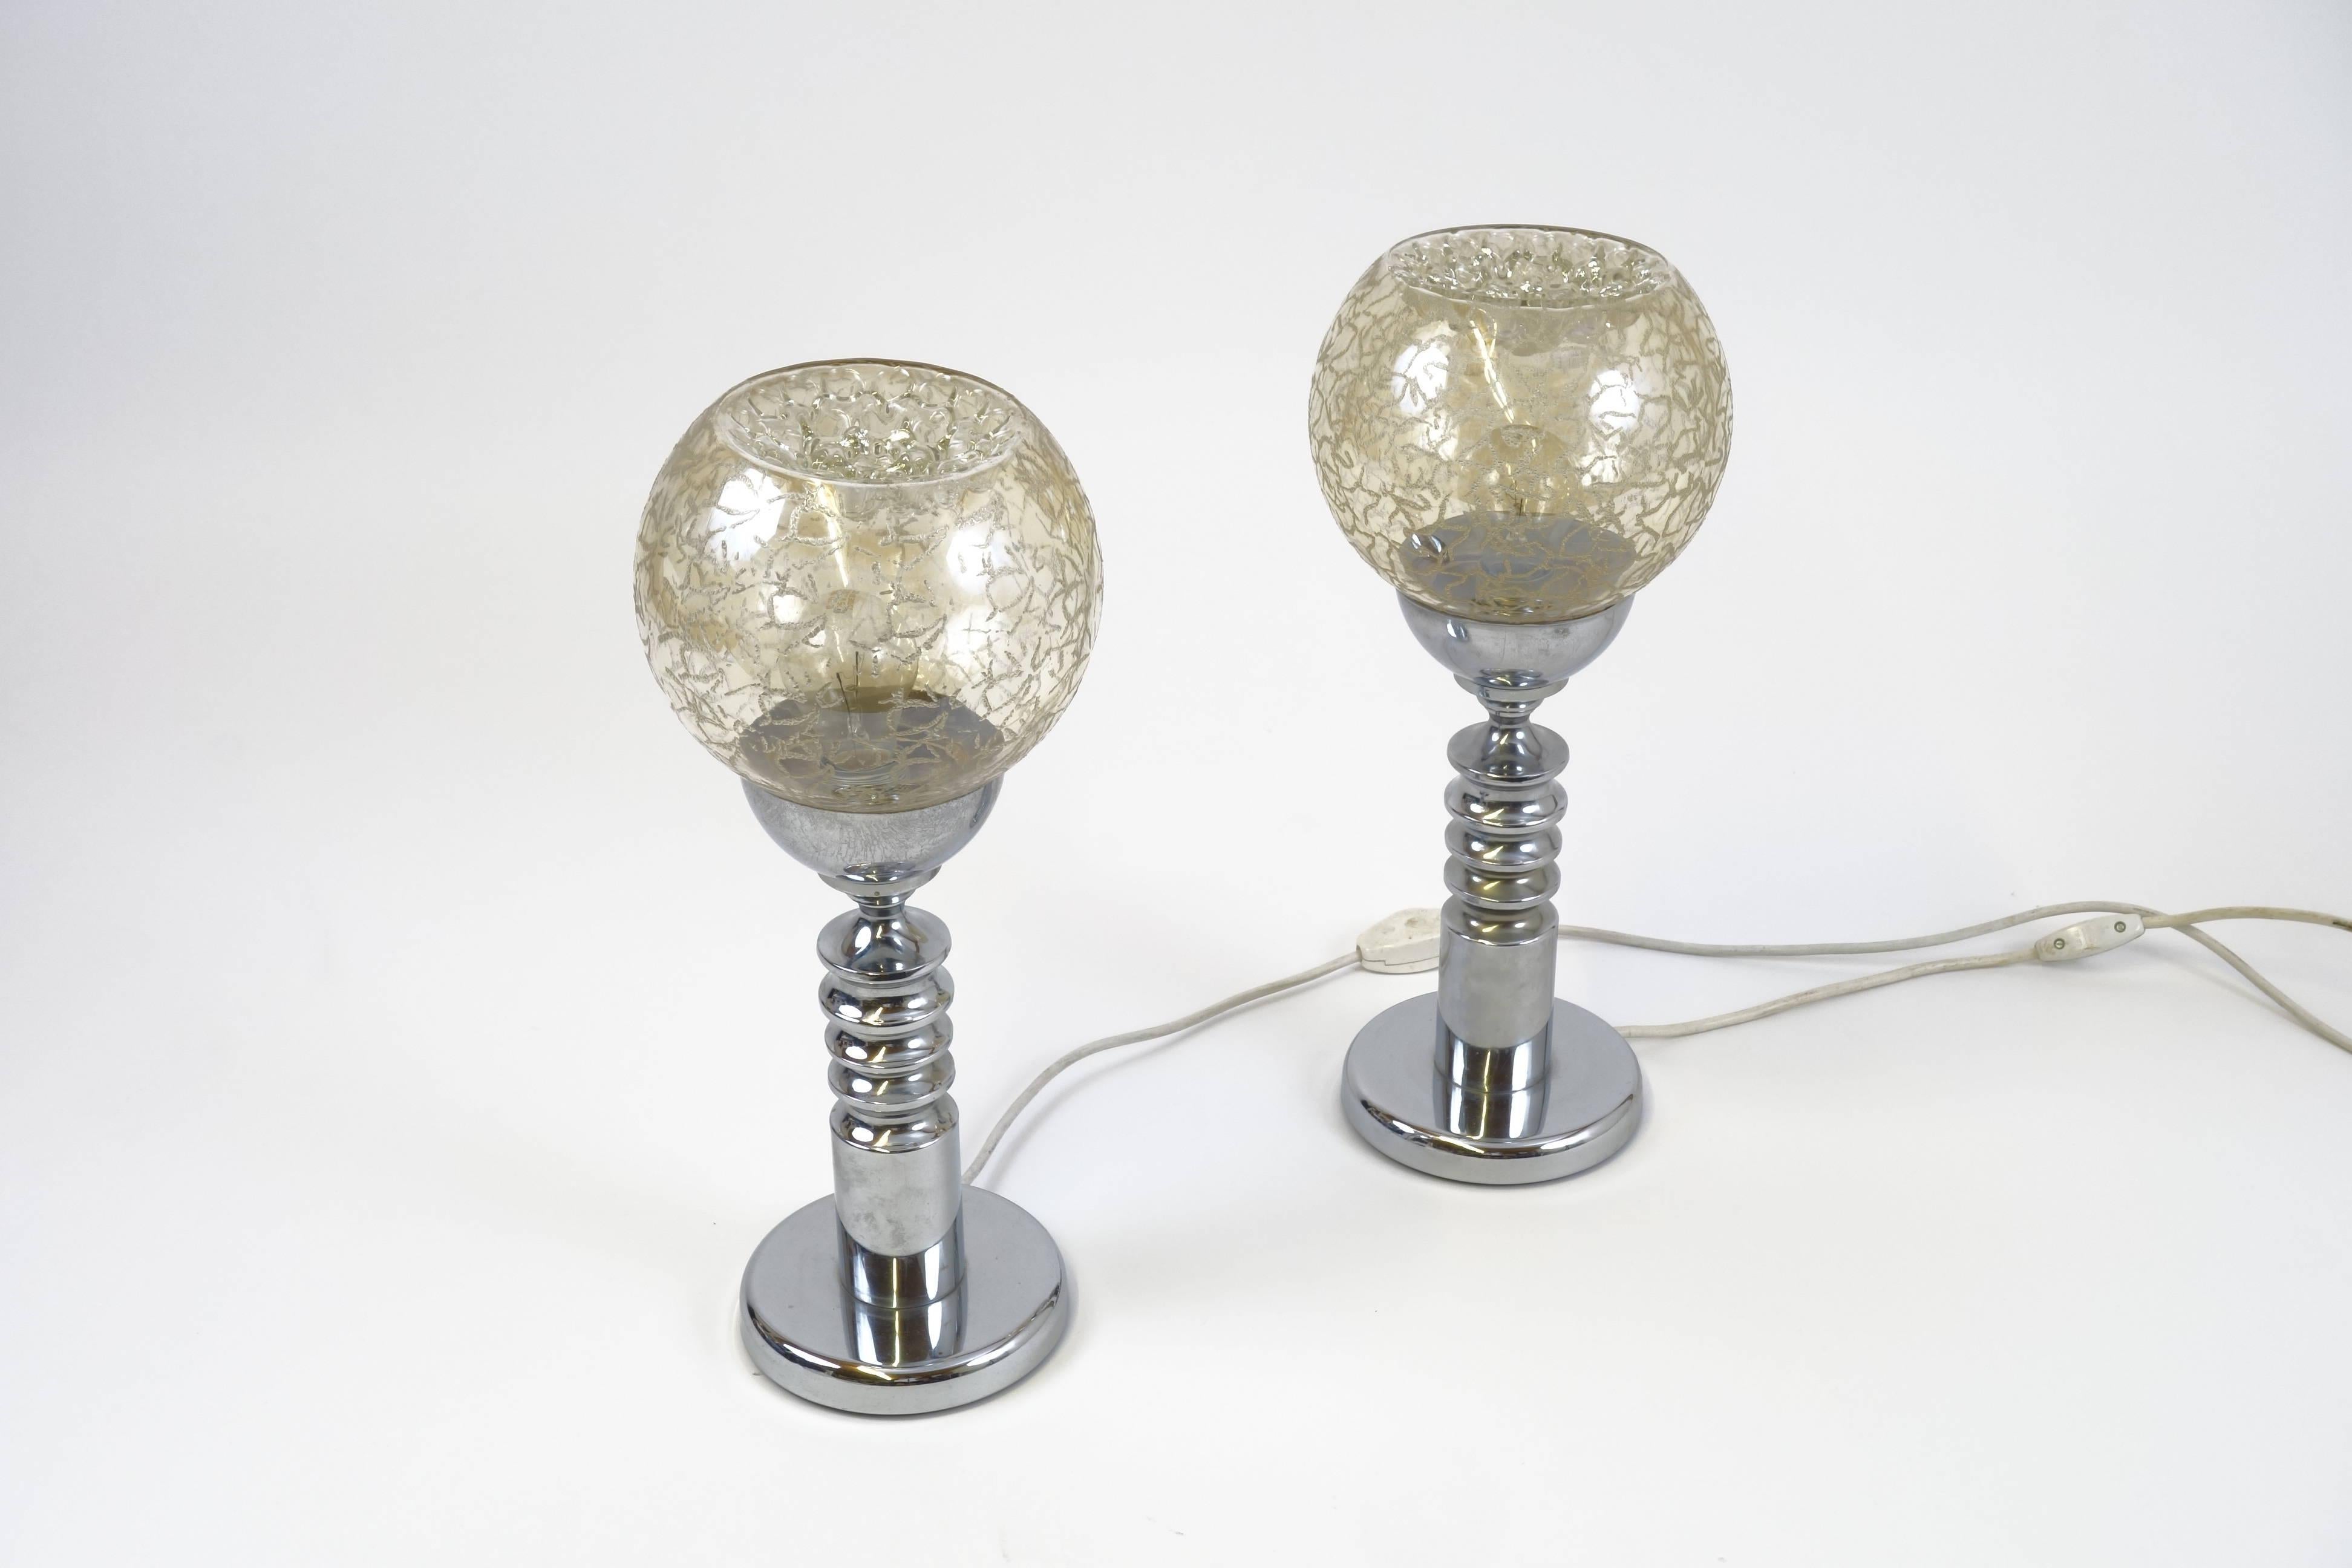 A pair of table lamps with chromed metal shafts and structured glass hemispheres, most probably manufactured by Barovier & Toso during the 1970s. Engraved Murano glass hemispheres, appearing in warm a yellow hue, offering an attractive contrast to